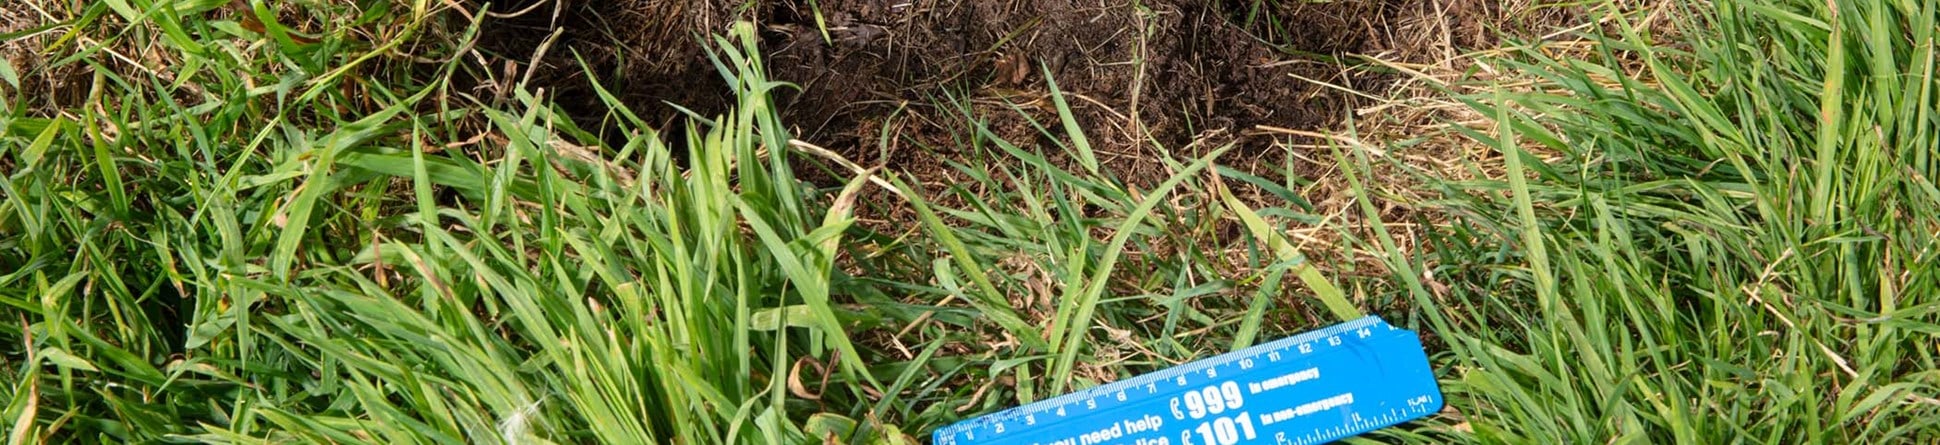 Damage to grass marked by a police ruler